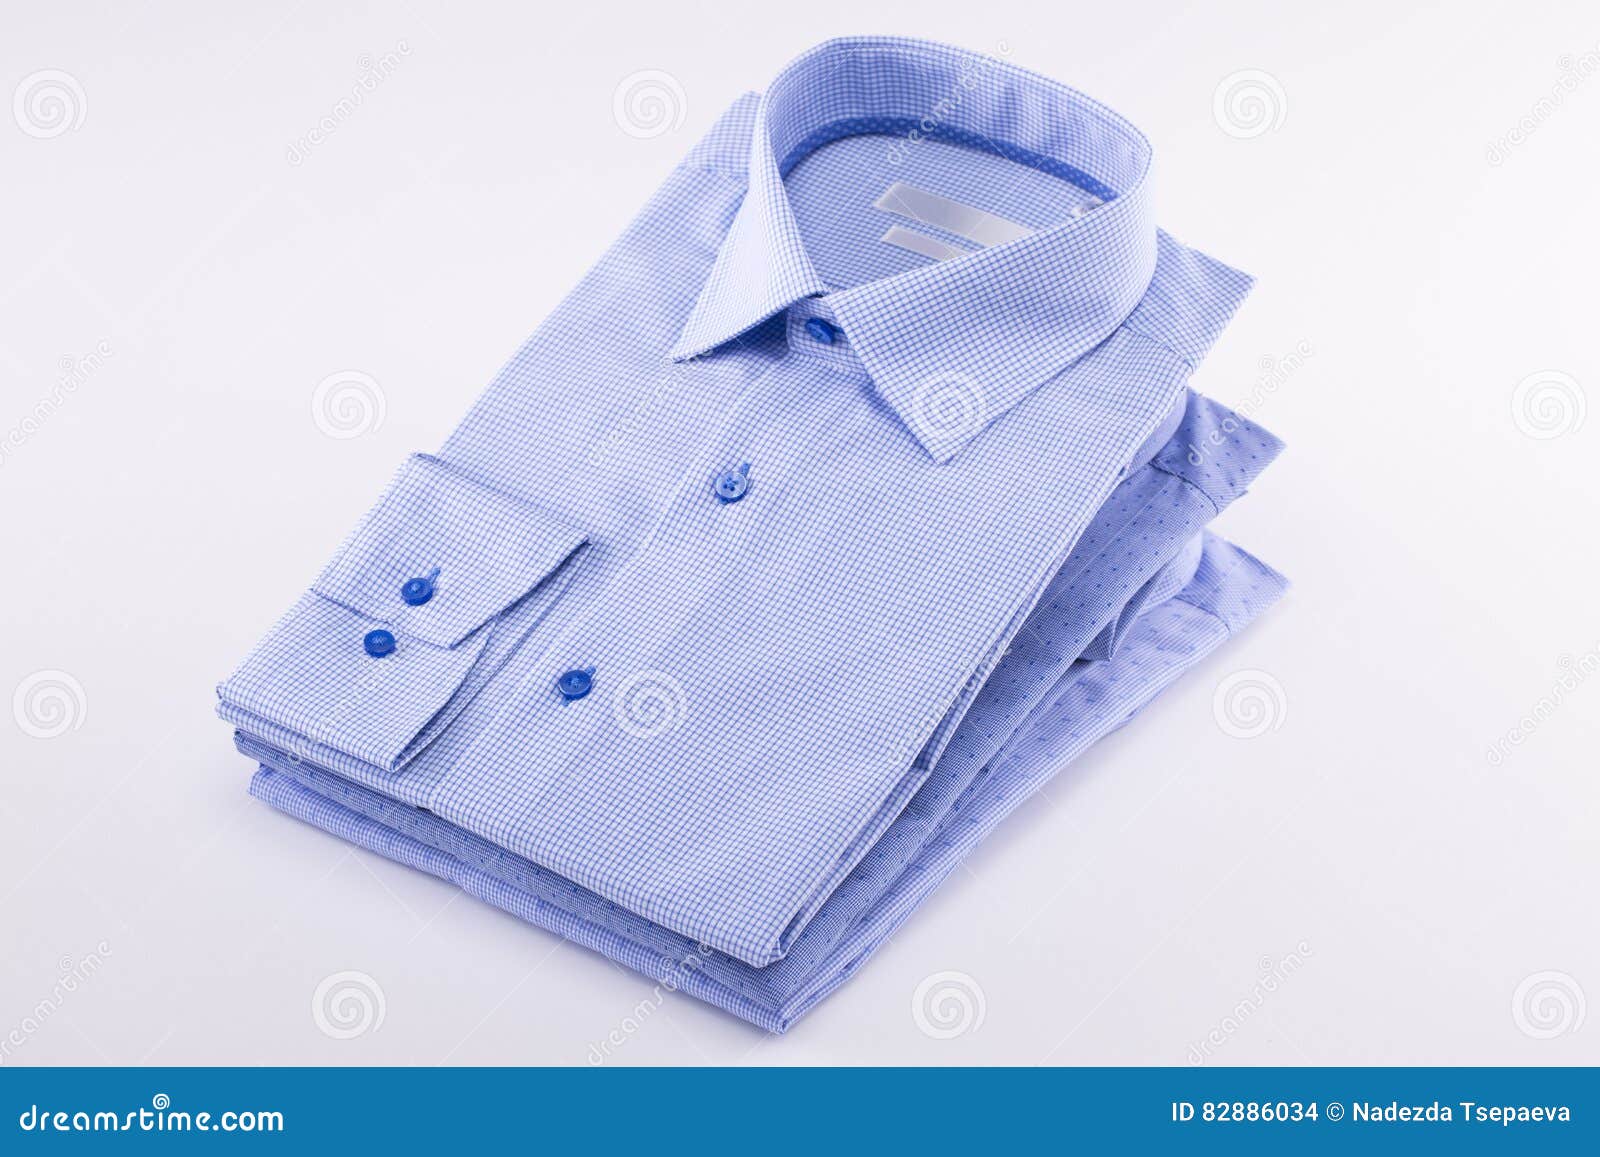 Classic Men`s Shirts Stacked Stock Photo - Image of accessory ...